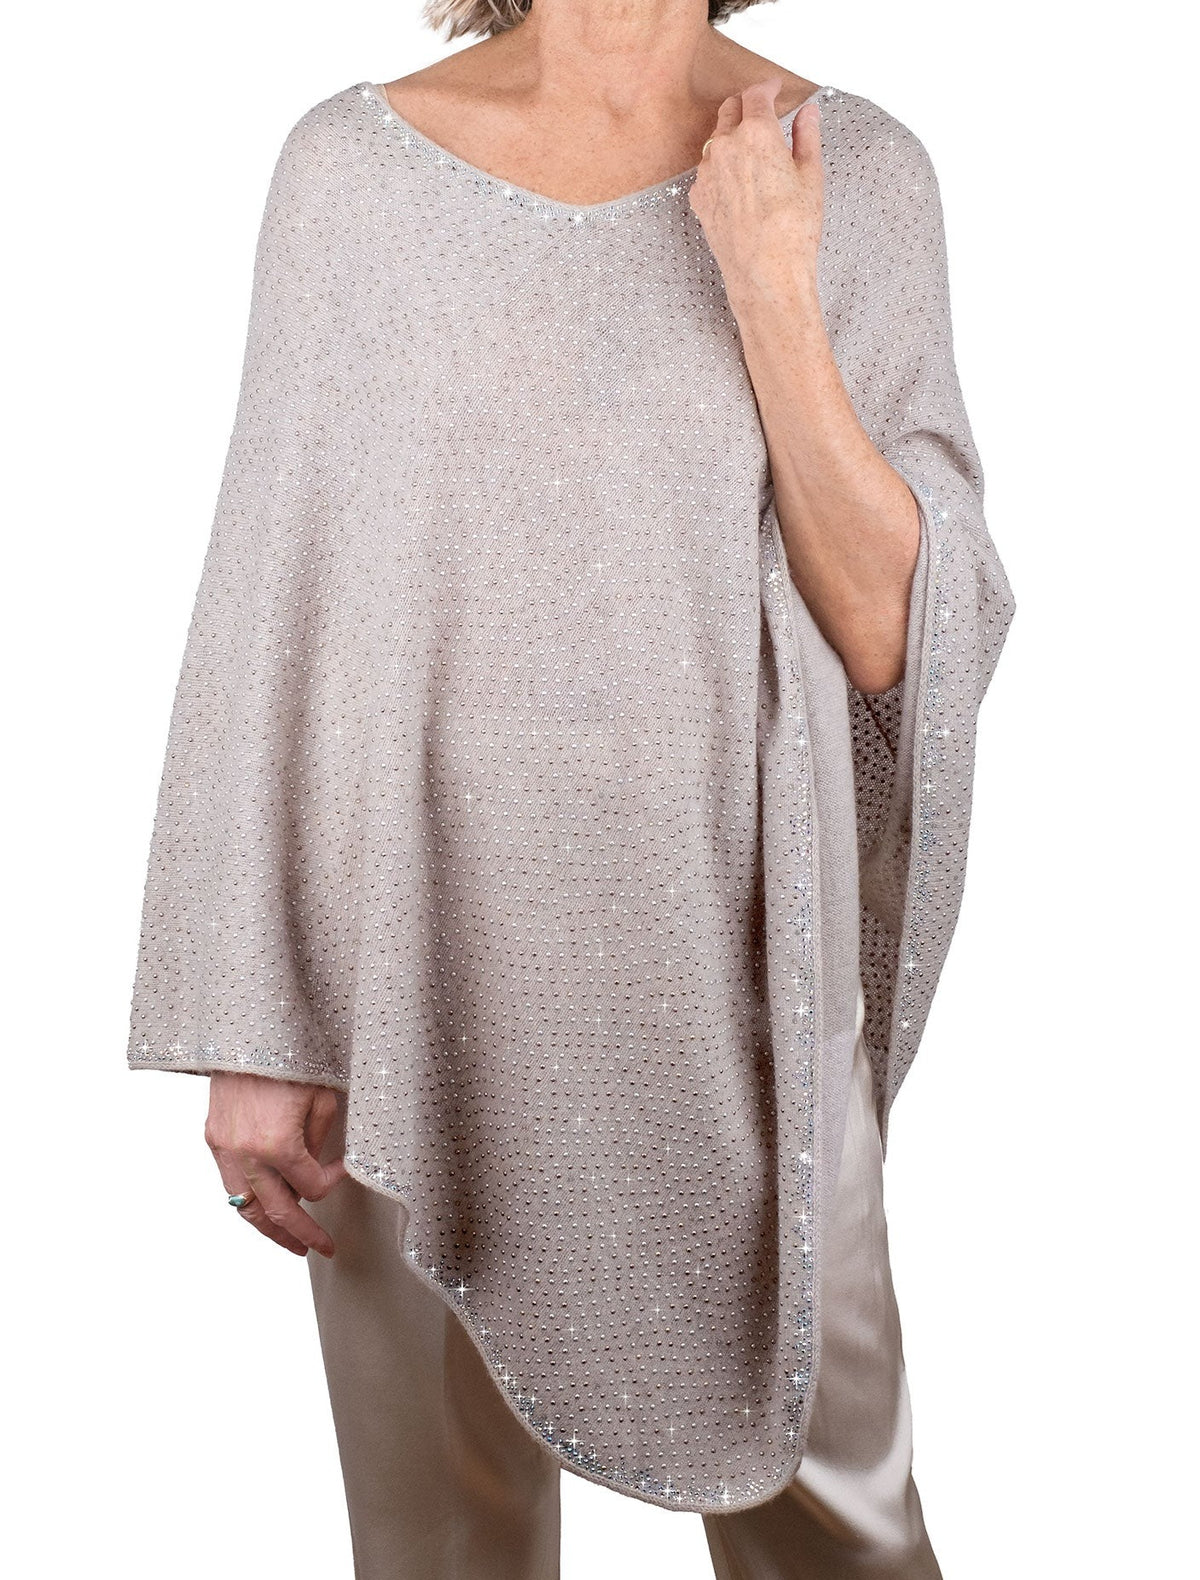 'Stone' Tissue Weight Assuit Poncho